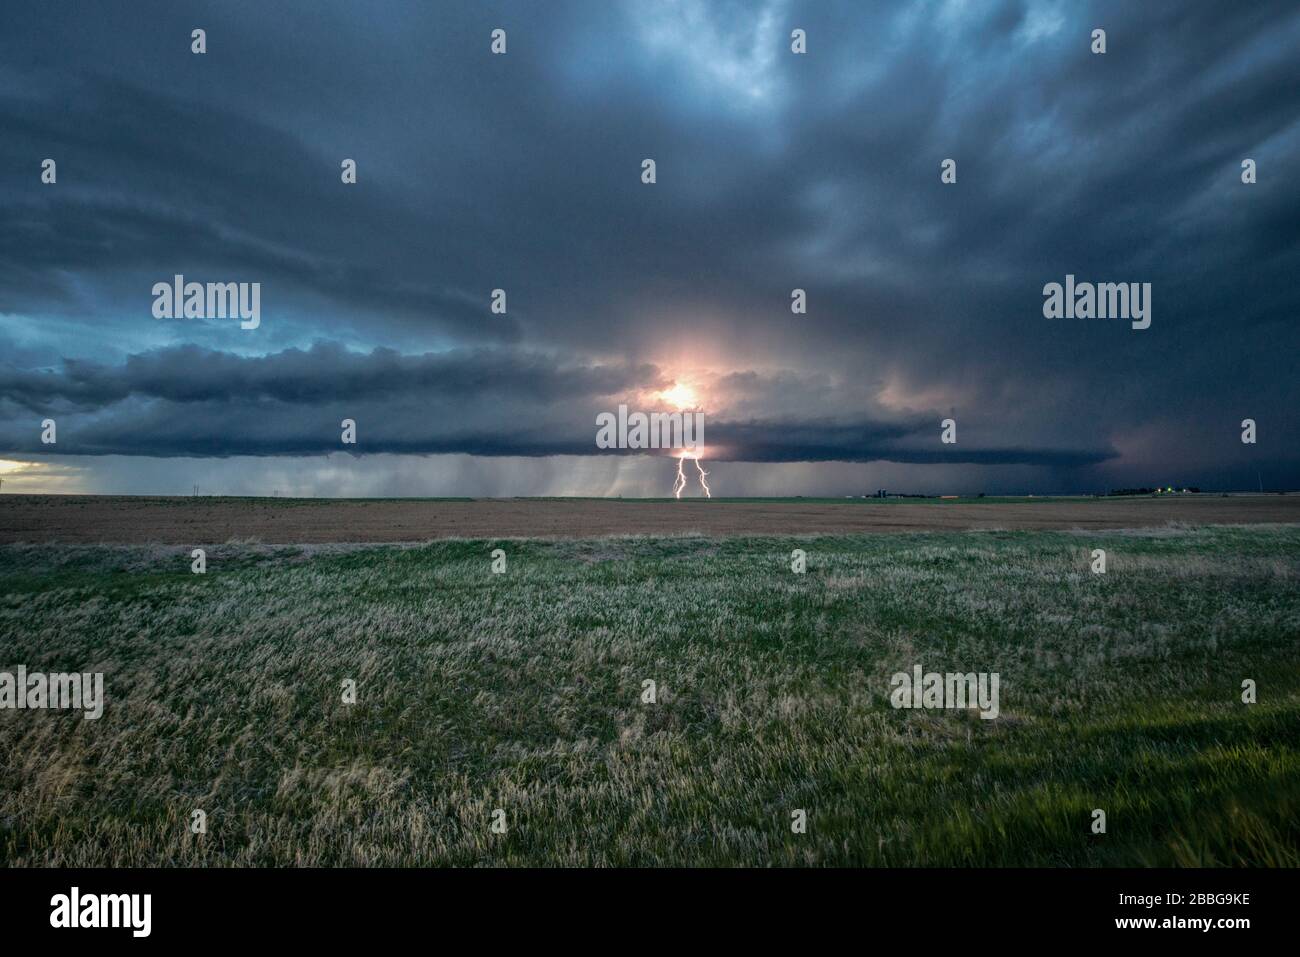 Storm with lightning strikes over a rural field in Nebraska, United States Stock Photo